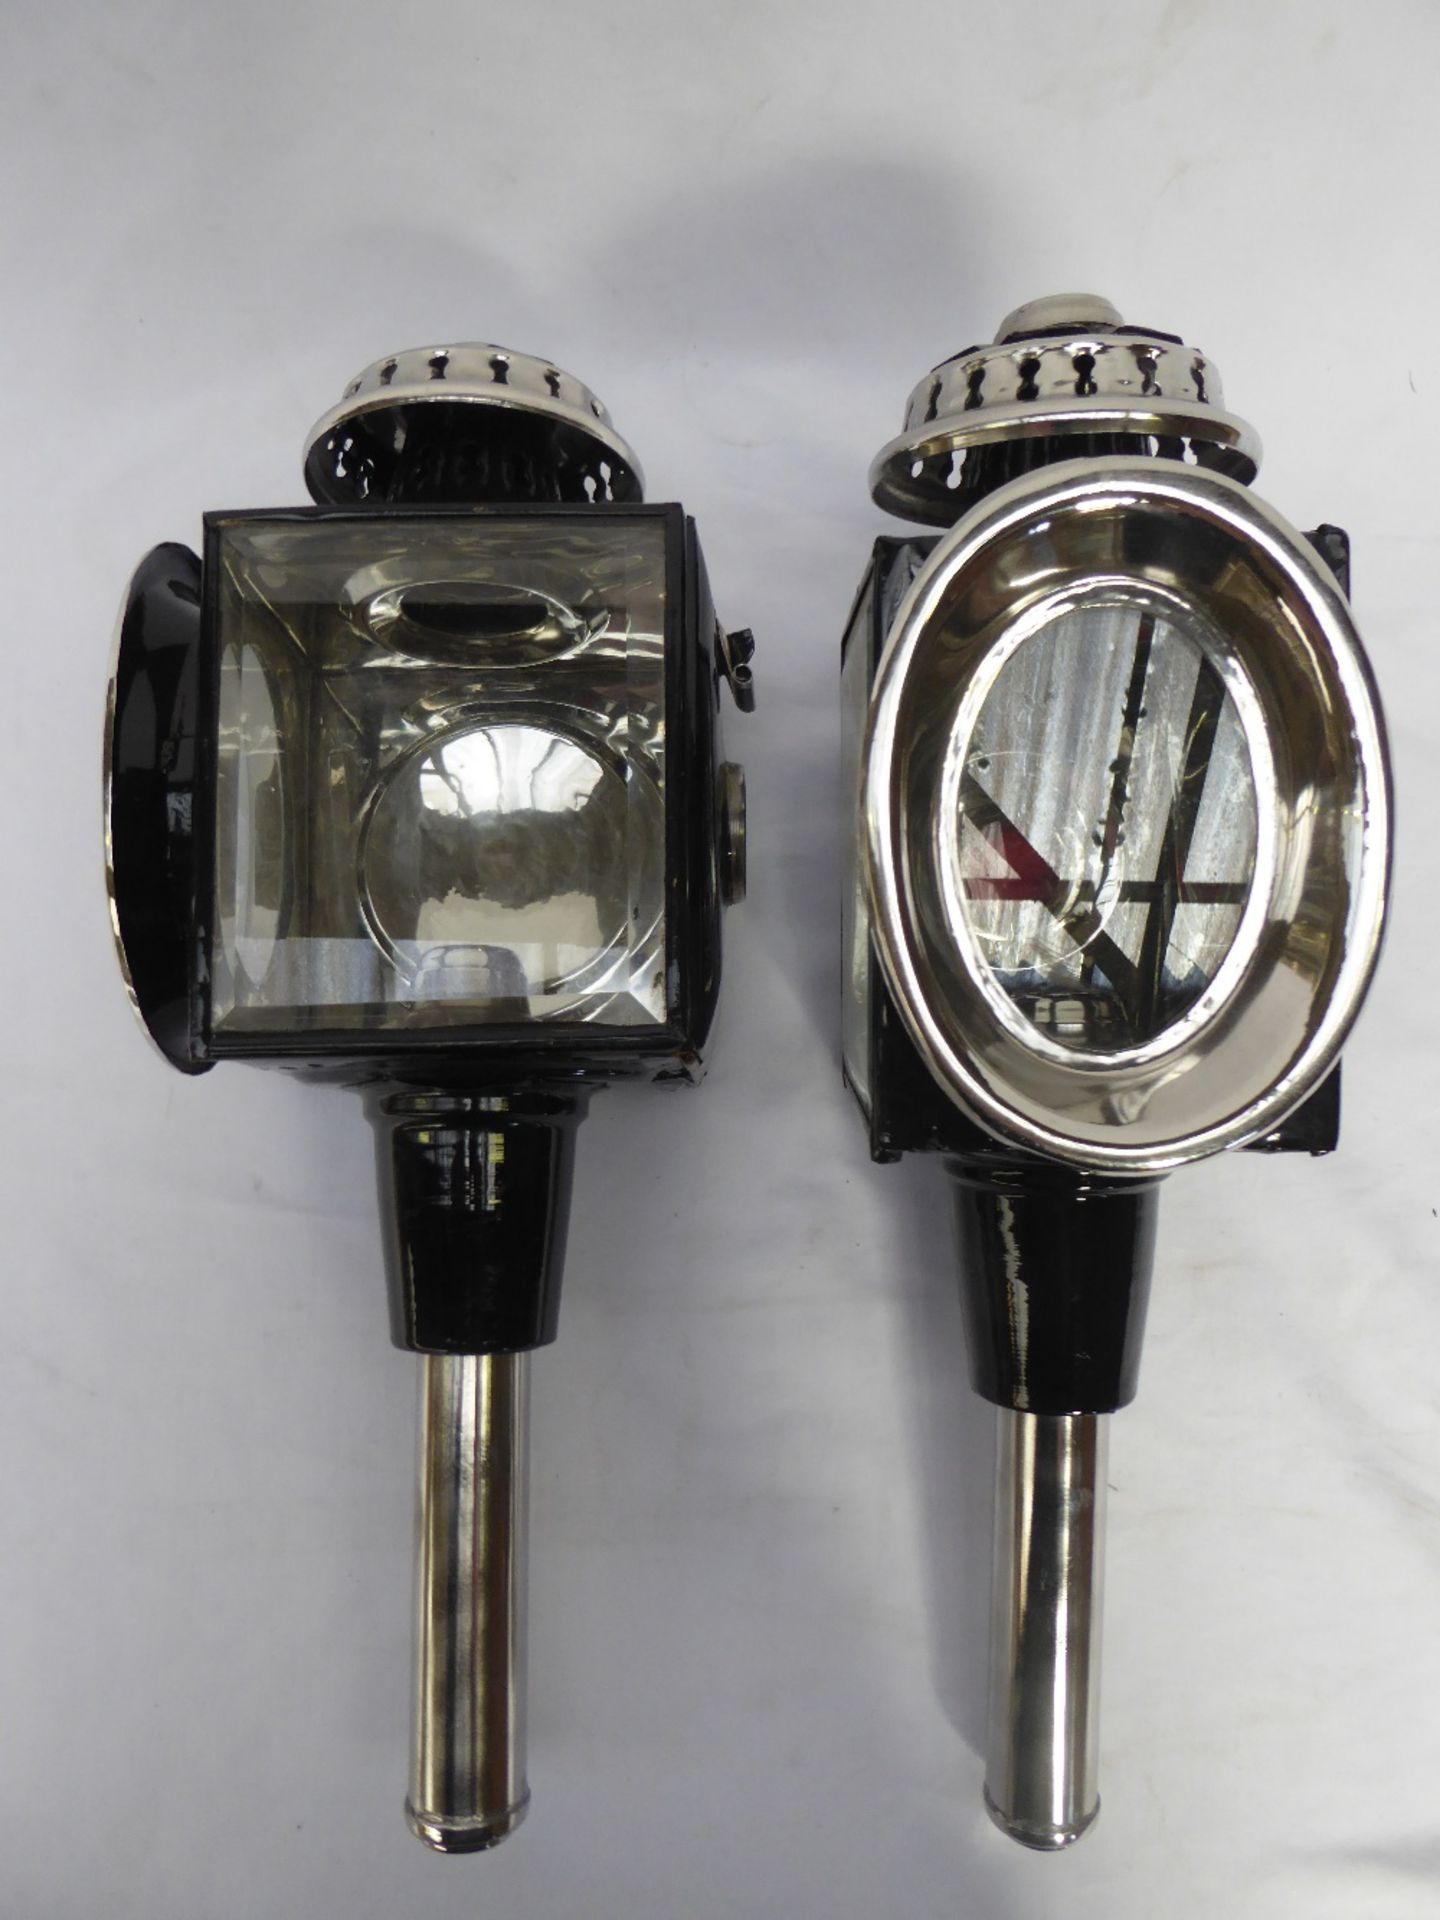 Pair of carriage lamps with oval fronts - carries VAT.